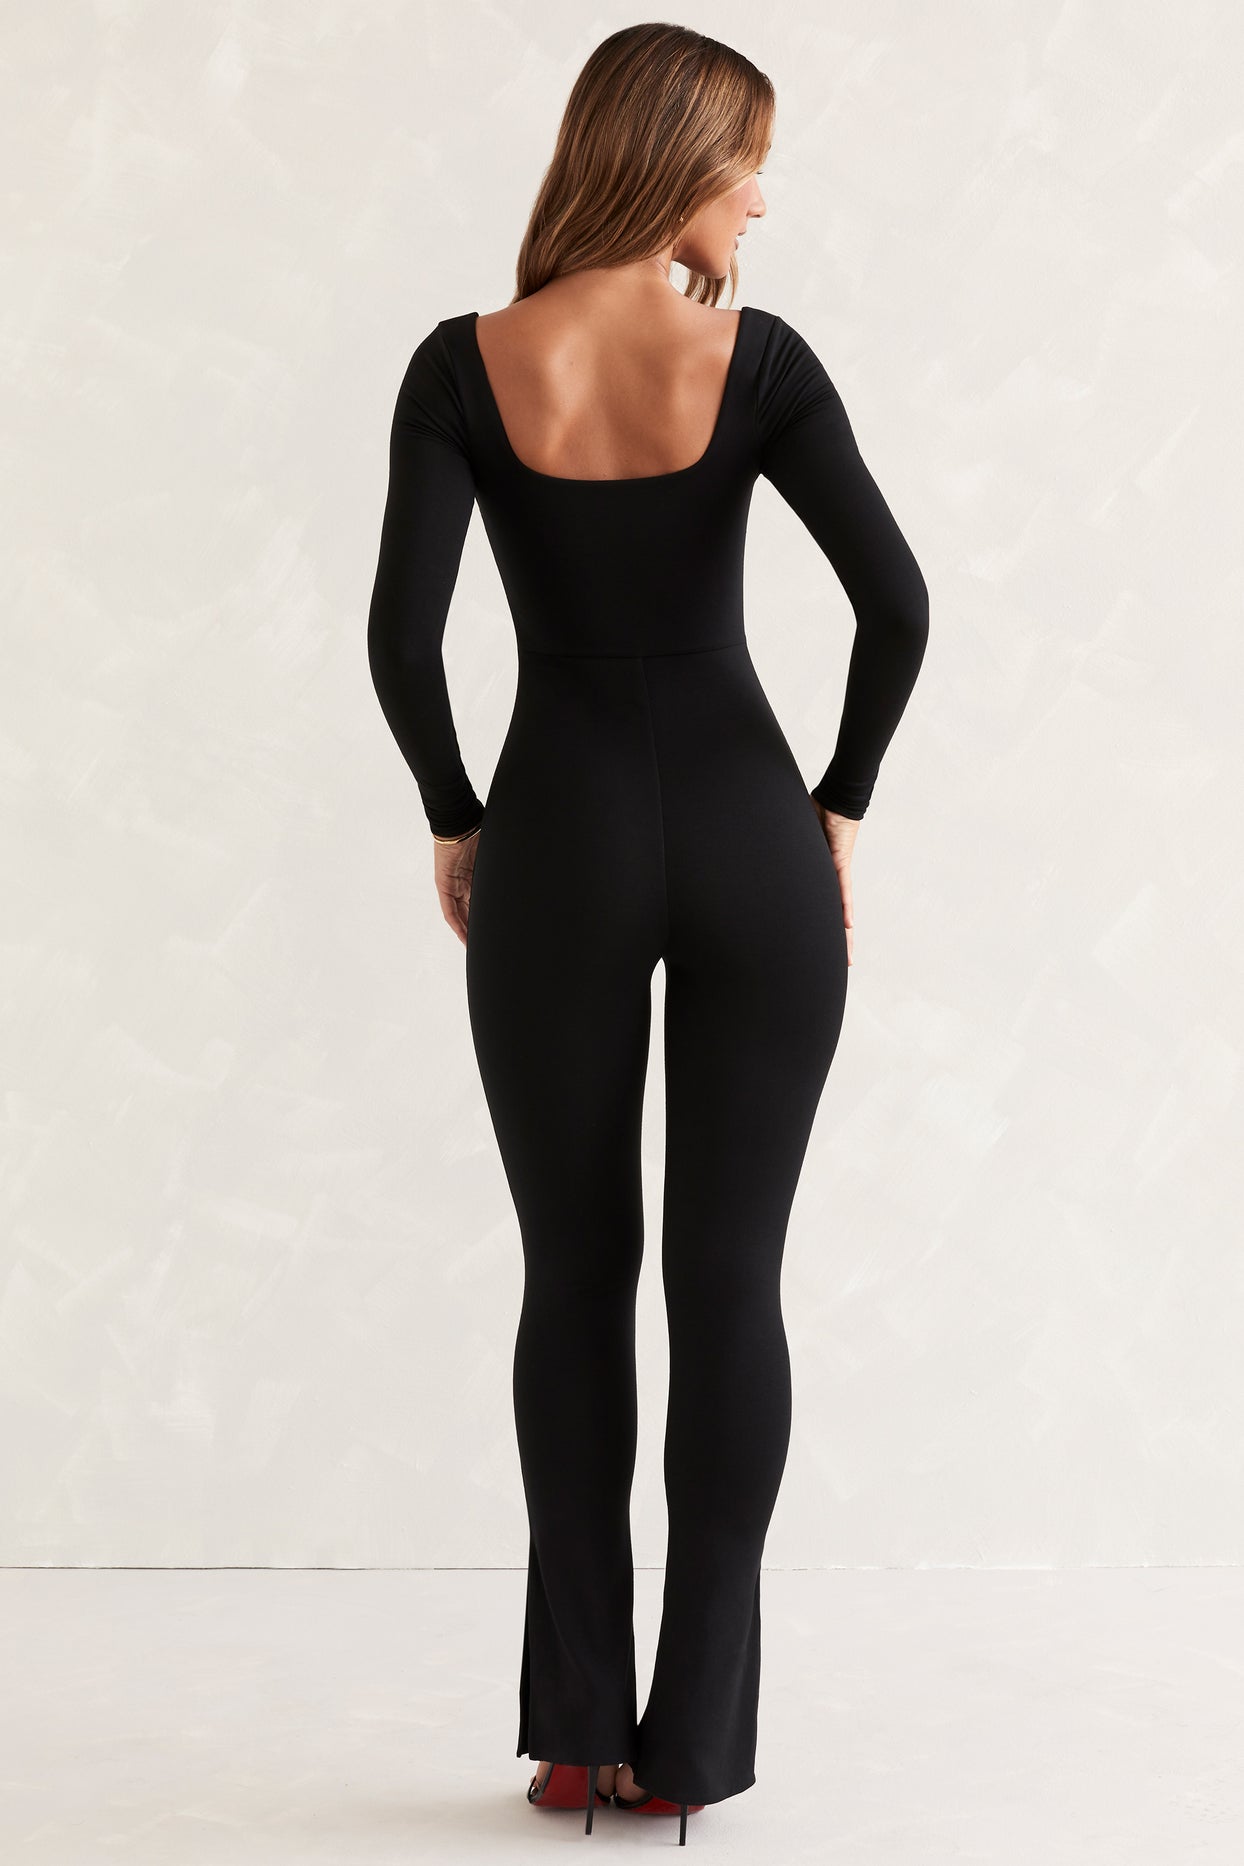 Jett Petite Long Sleeve Square Neck Jumpsuit in Black | Oh Polly